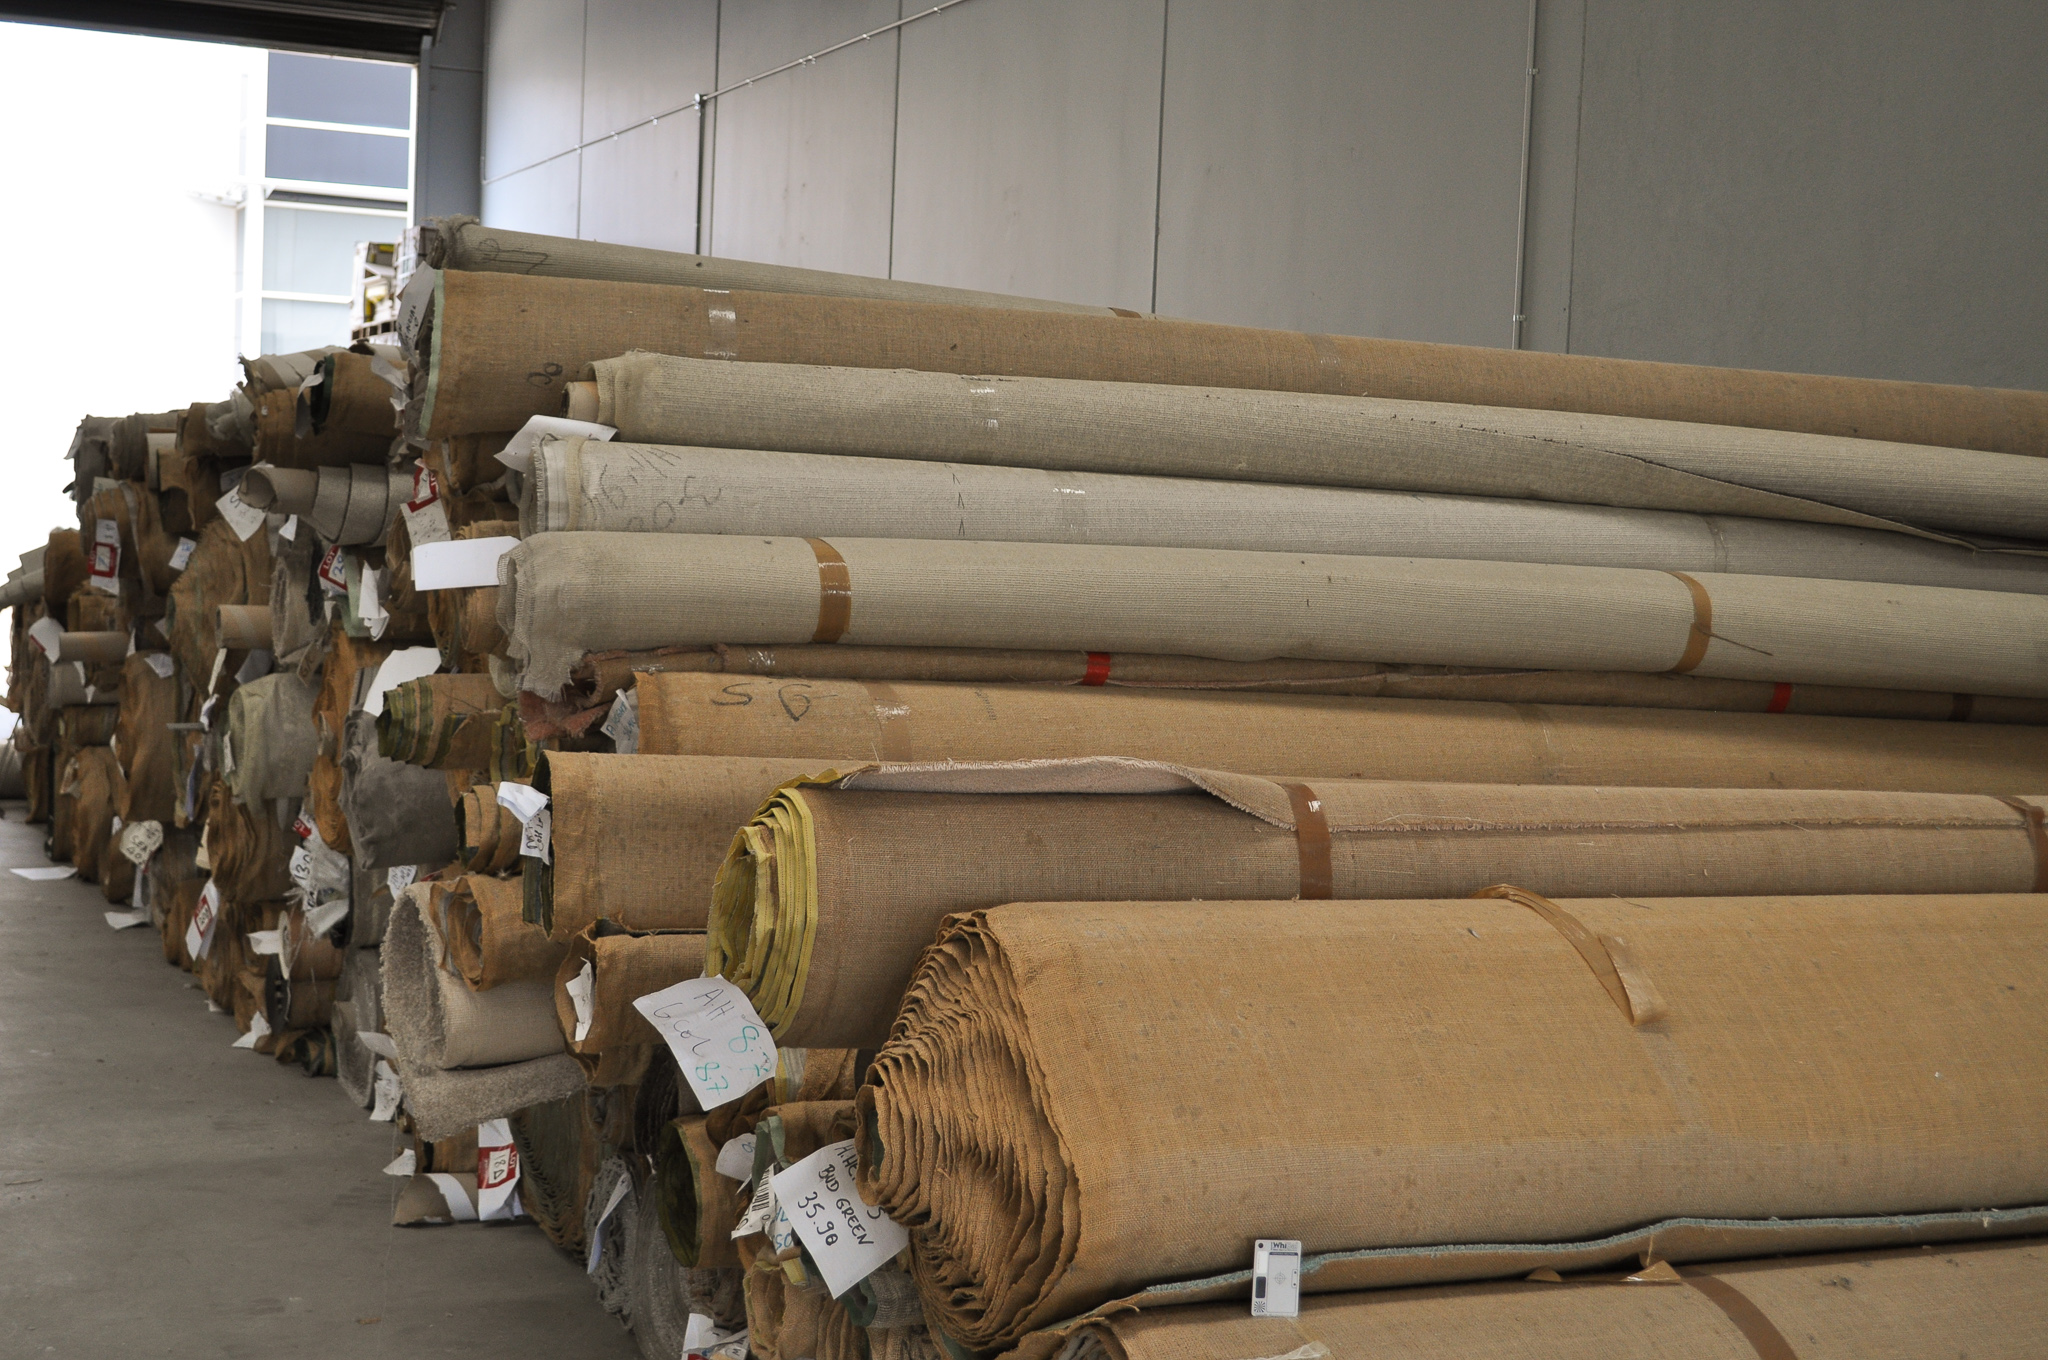 rolls of carpet in the warehouse of Concord Floors, they being carpet stock of Concord Floors.